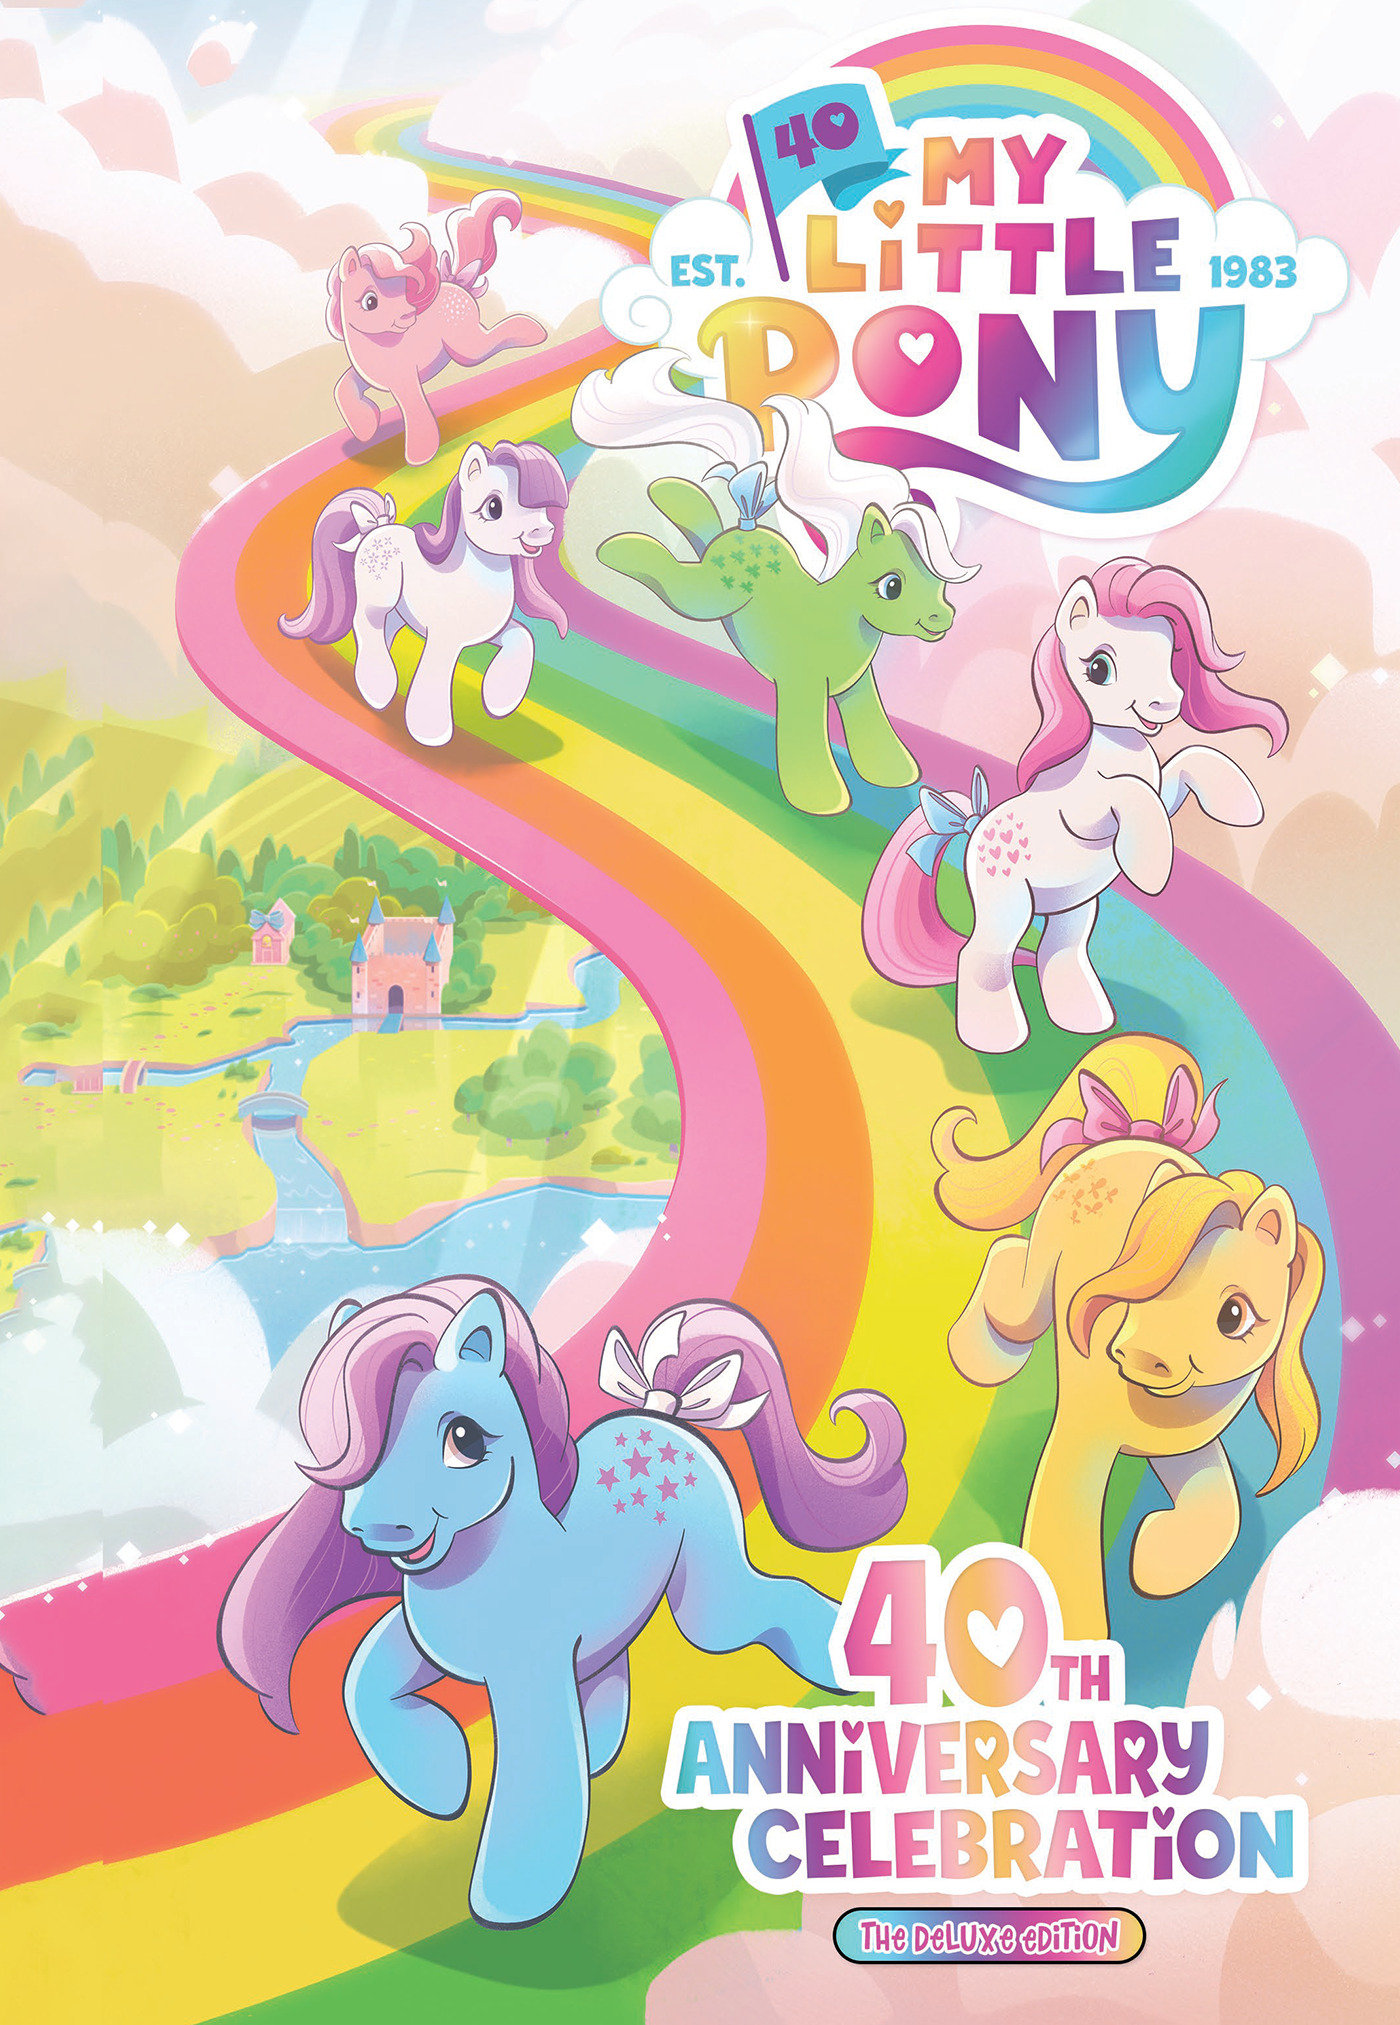 My Little Pony 40th Anniversary Celebration--The Deluxe Edition